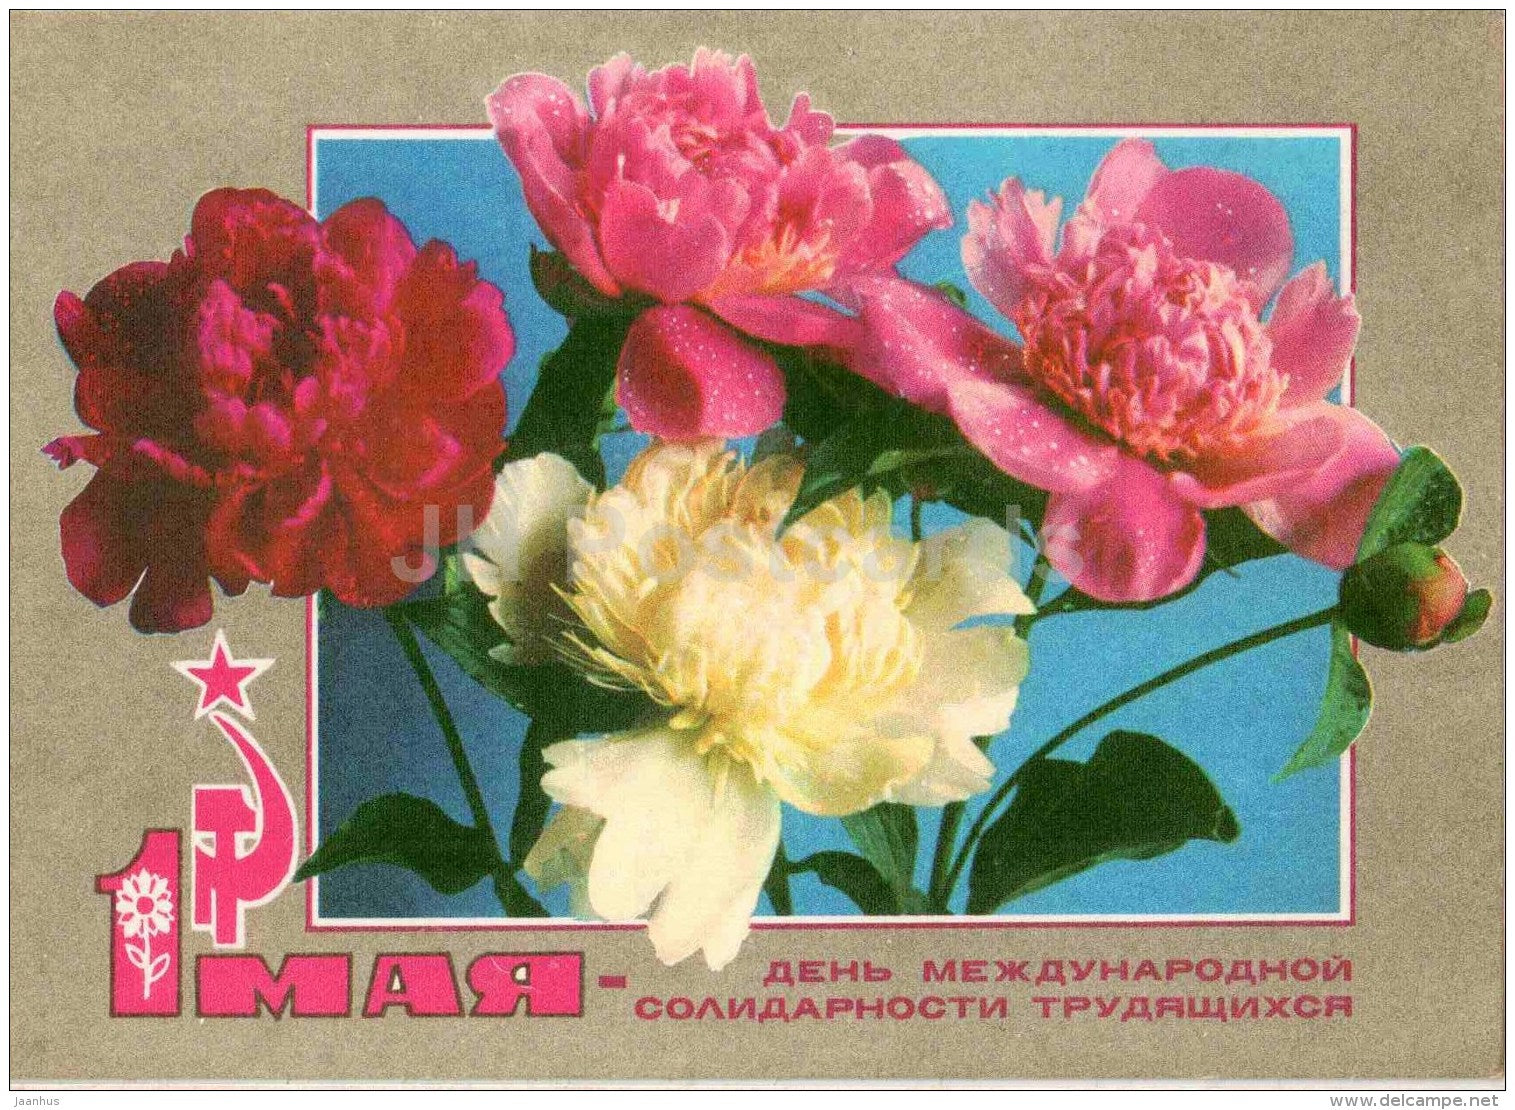 May 1 International Workers' Day greeting card - peony - flowers - hammer and sickle - 1972 - Russia USSR - used - JH Postcards